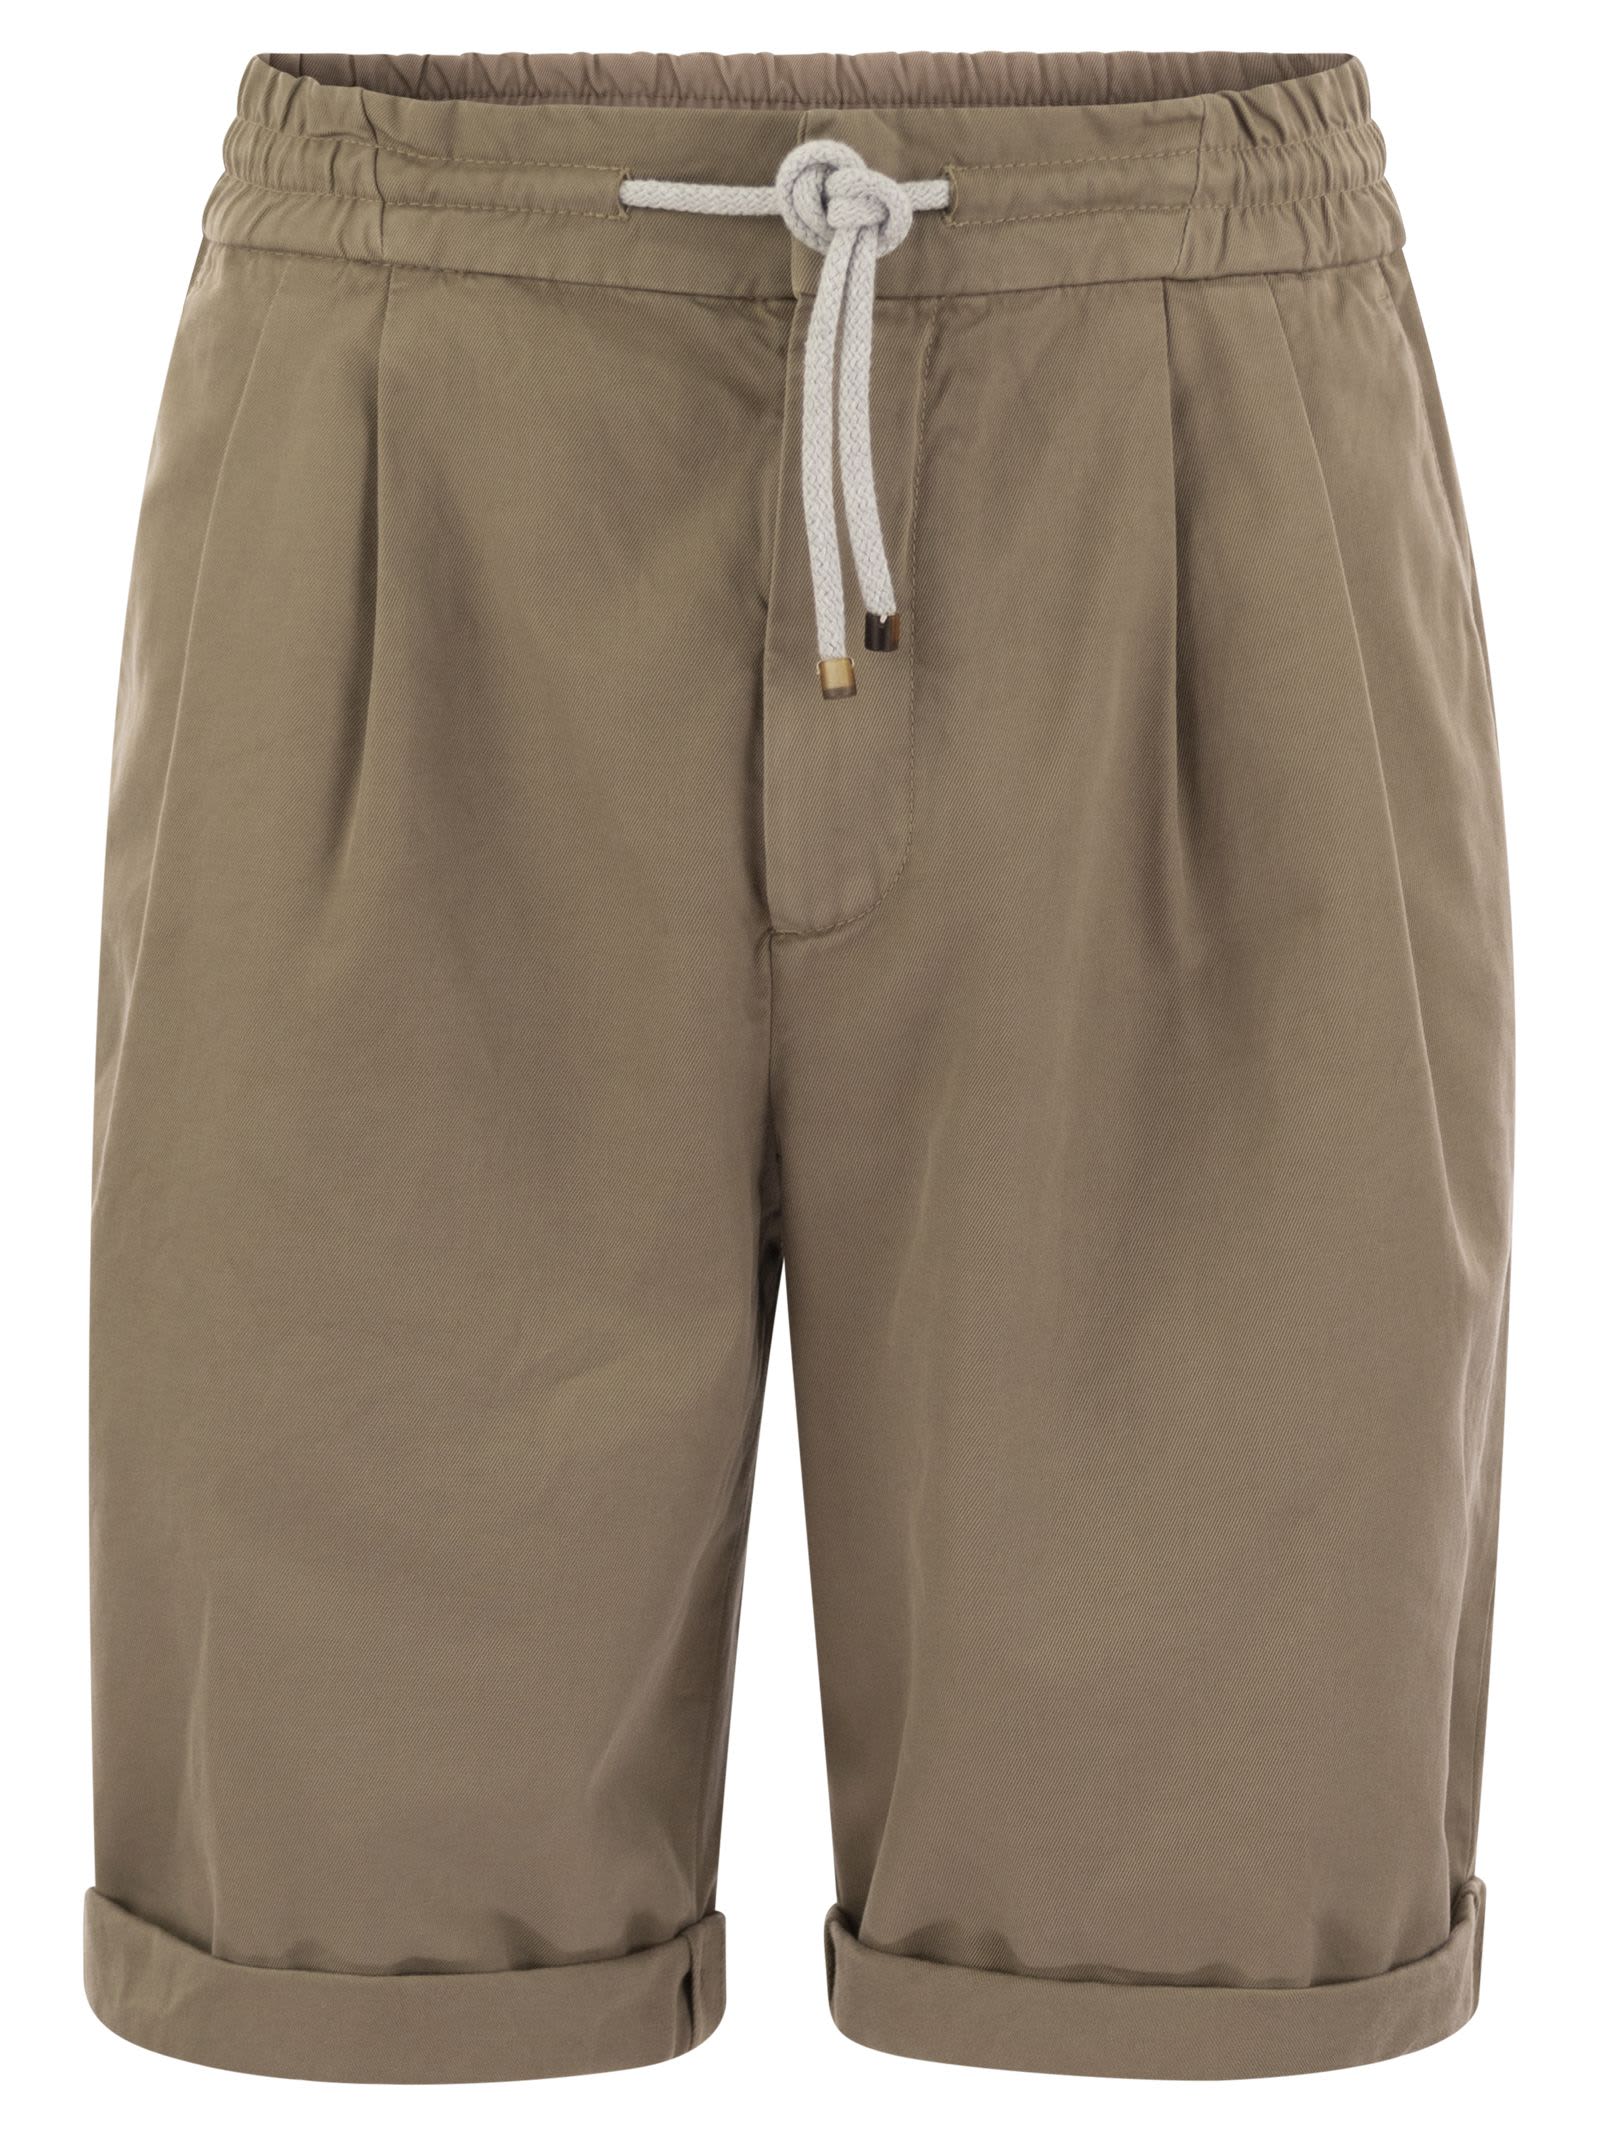 BRUNELLO CUCINELLI BERMUDA SHORTS IN GARMENT-DYED COTTON GABARDINE WITH DRAWSTRING AND DOUBLE DARTS